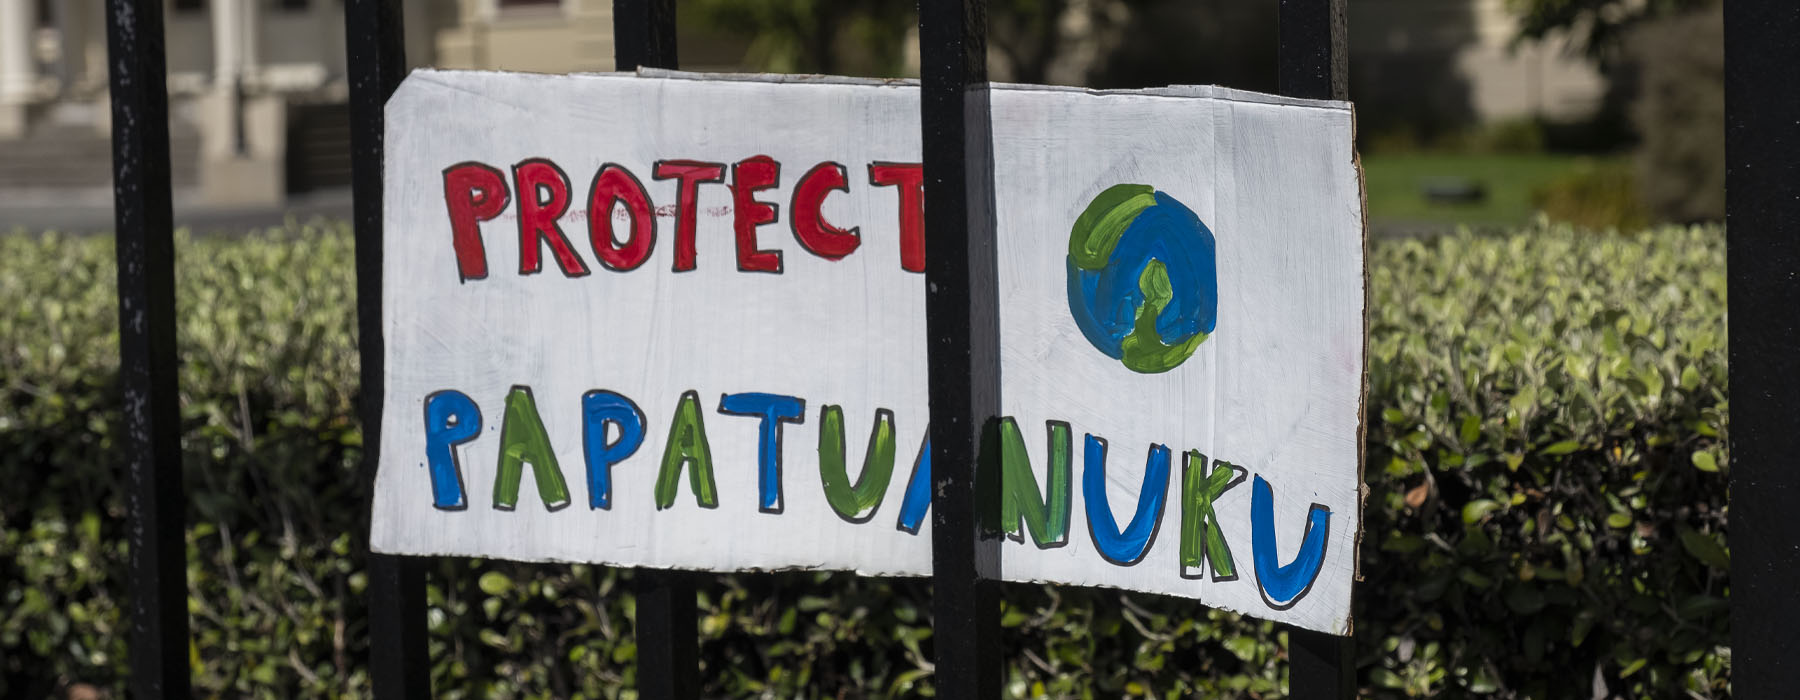 A sign on a fence with a picture of the Earth and the message "Protect Papatuanuku"